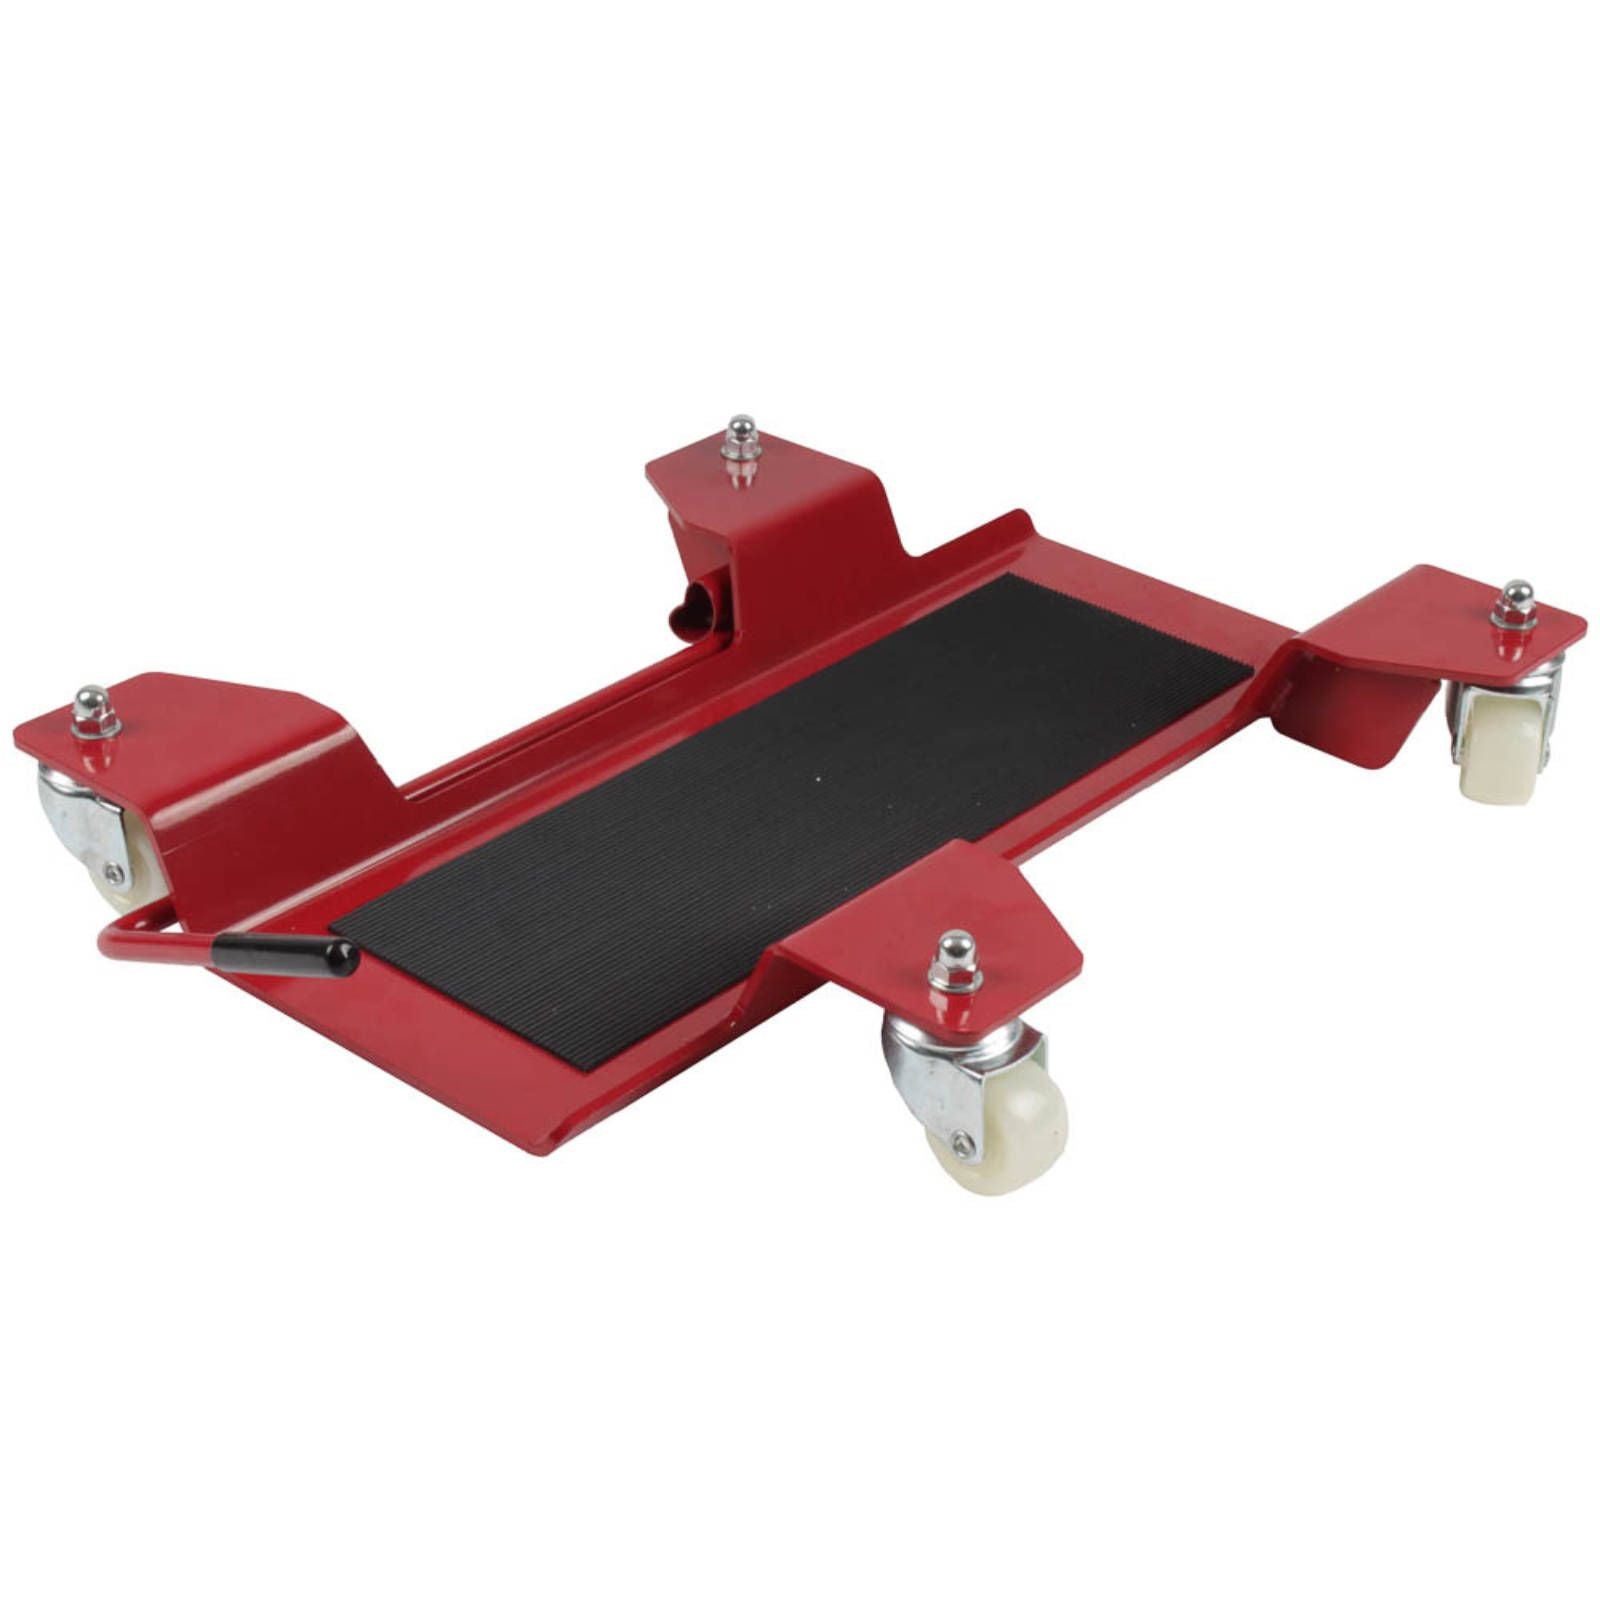 New WHITES Motorcycle Mover Stand TD-103 #TMMM